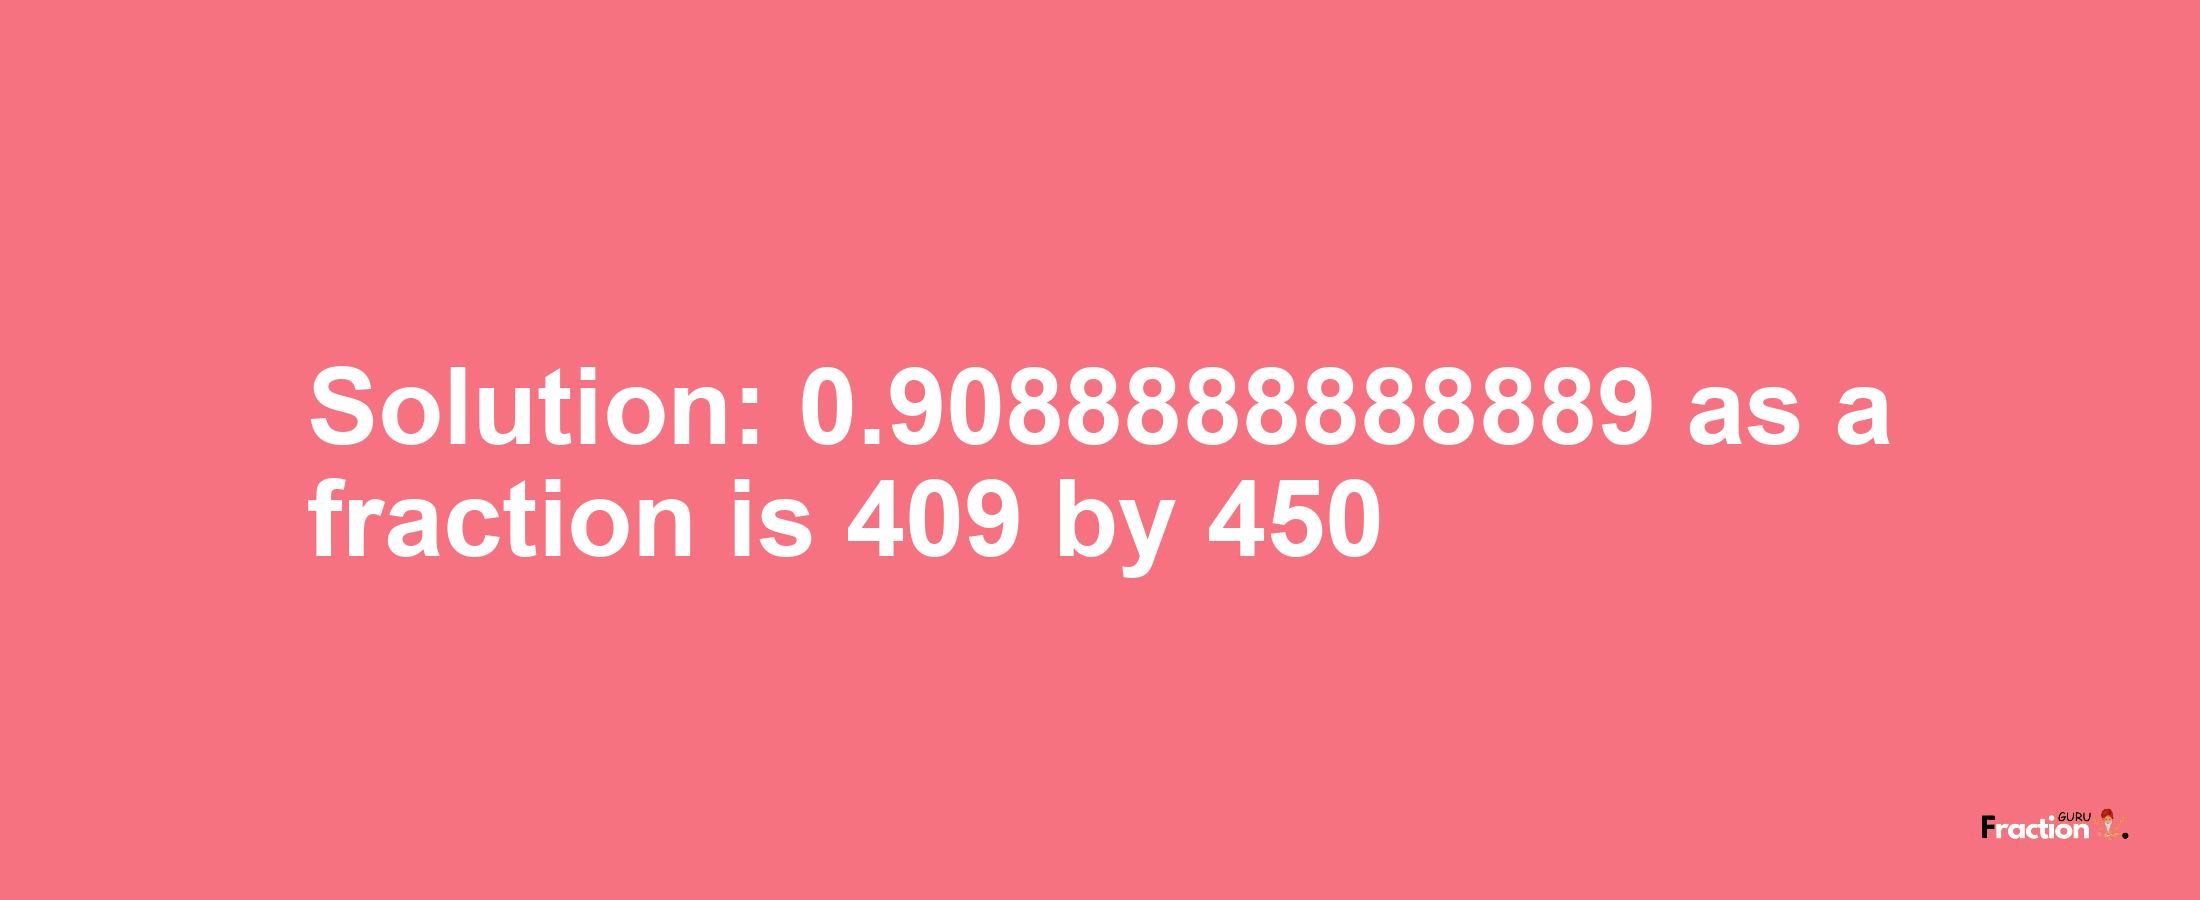 Solution:0.9088888888889 as a fraction is 409/450